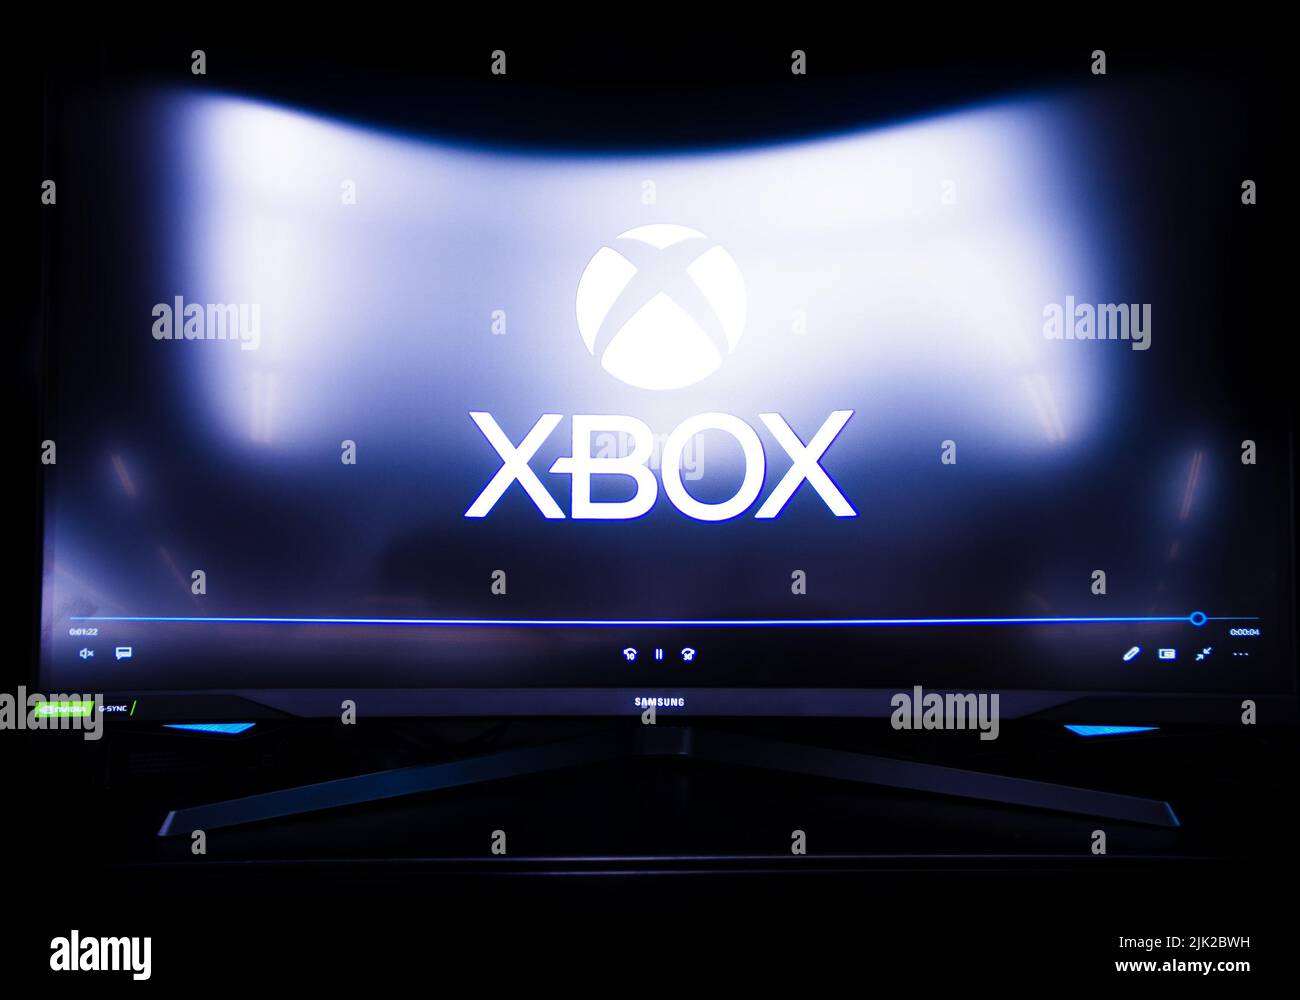 Samsung gaming curved monitor demonstrates logo the Xbox Game pass Stock Photo